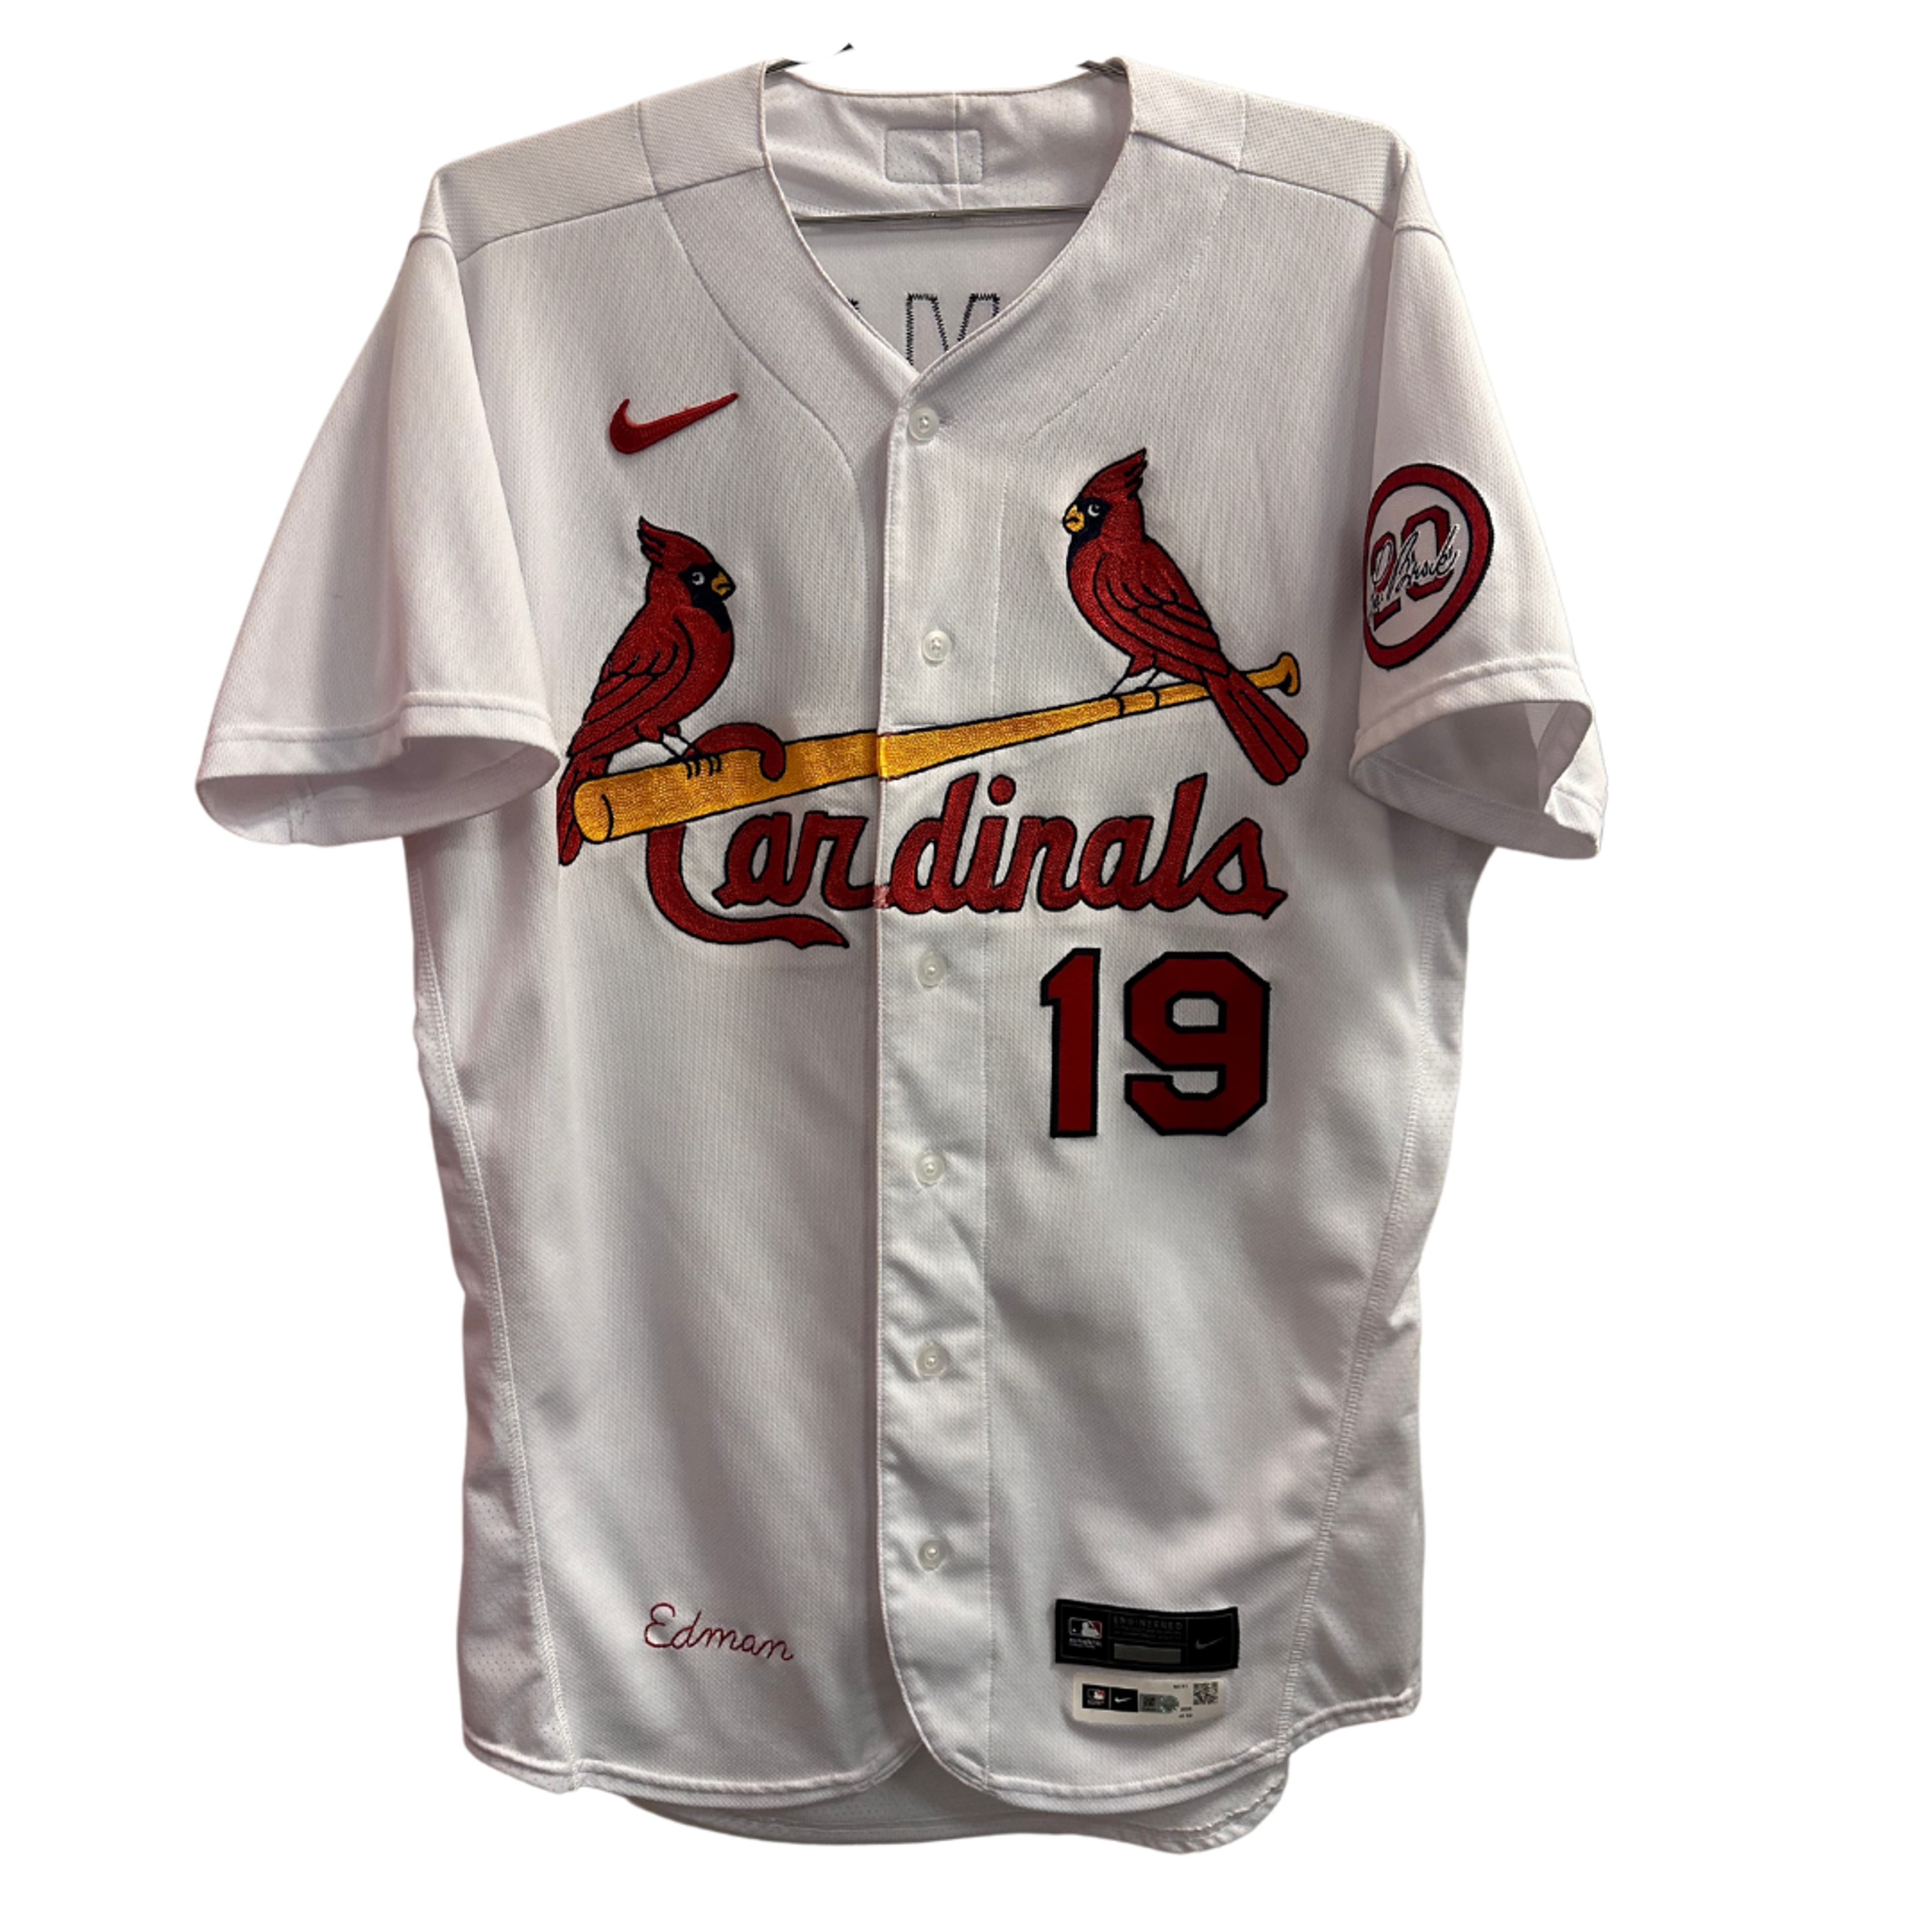 NTWRK - Tommy Edman St Louis Cardinals Game Used Nike Home Jersey w/ Lou